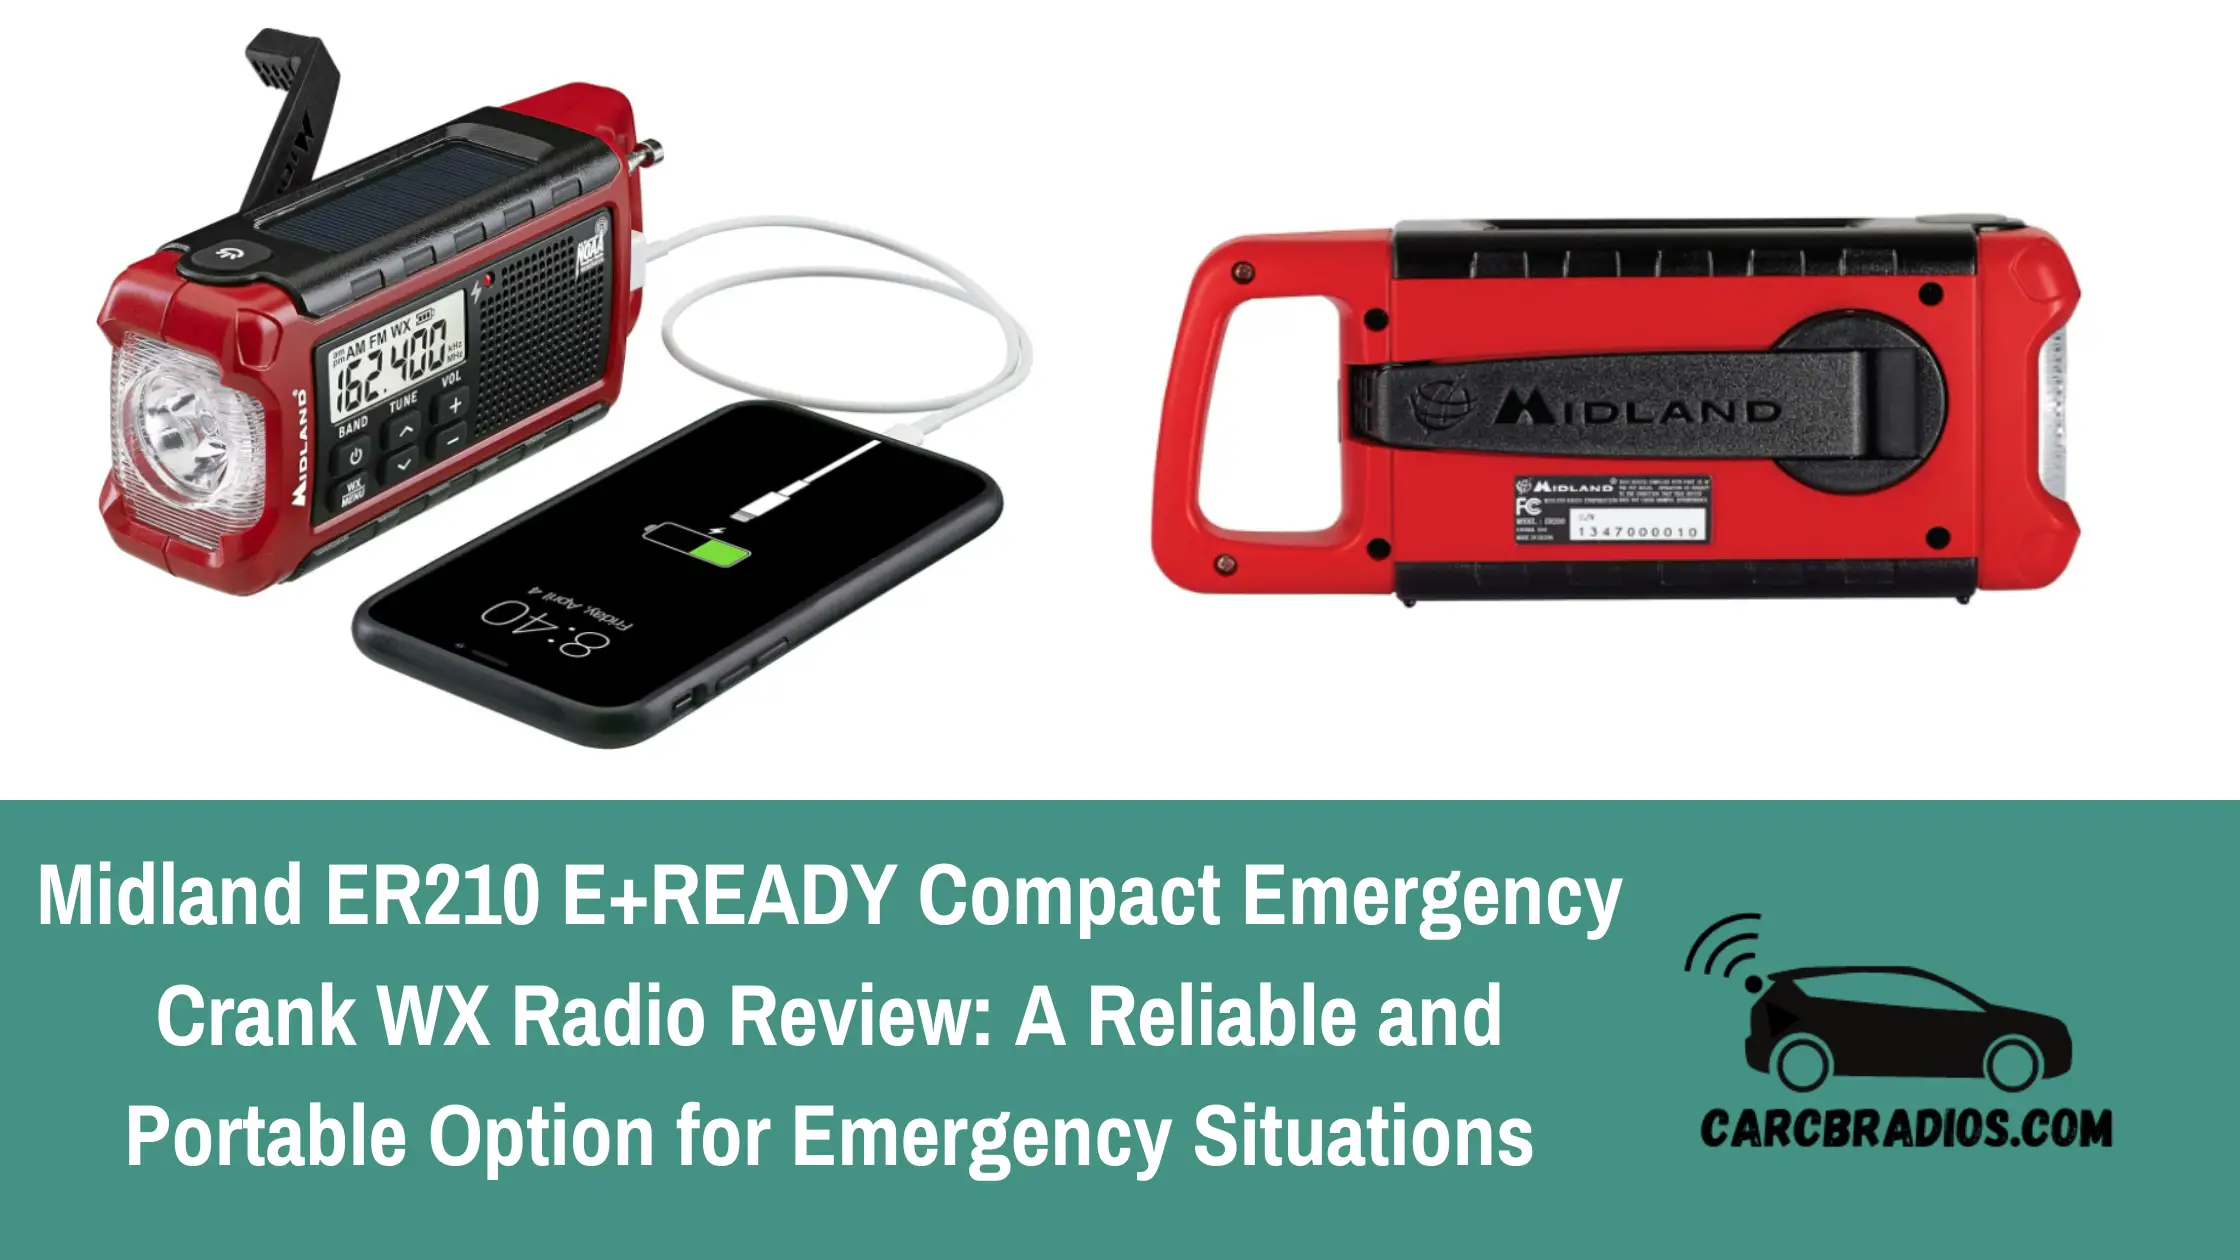 The Midland ER210 E+READY Compact Emergency Crank WX Radio is a versatile and durable device that can receive AM, FM, and NOAA weather broadcasts. It also features a bright Cree LED flashlight, USB charger output, hand crank, and solar panel for emergency power. The radio's compact size makes it easy to pack in your backpack or emergency kit and take with you on the go.